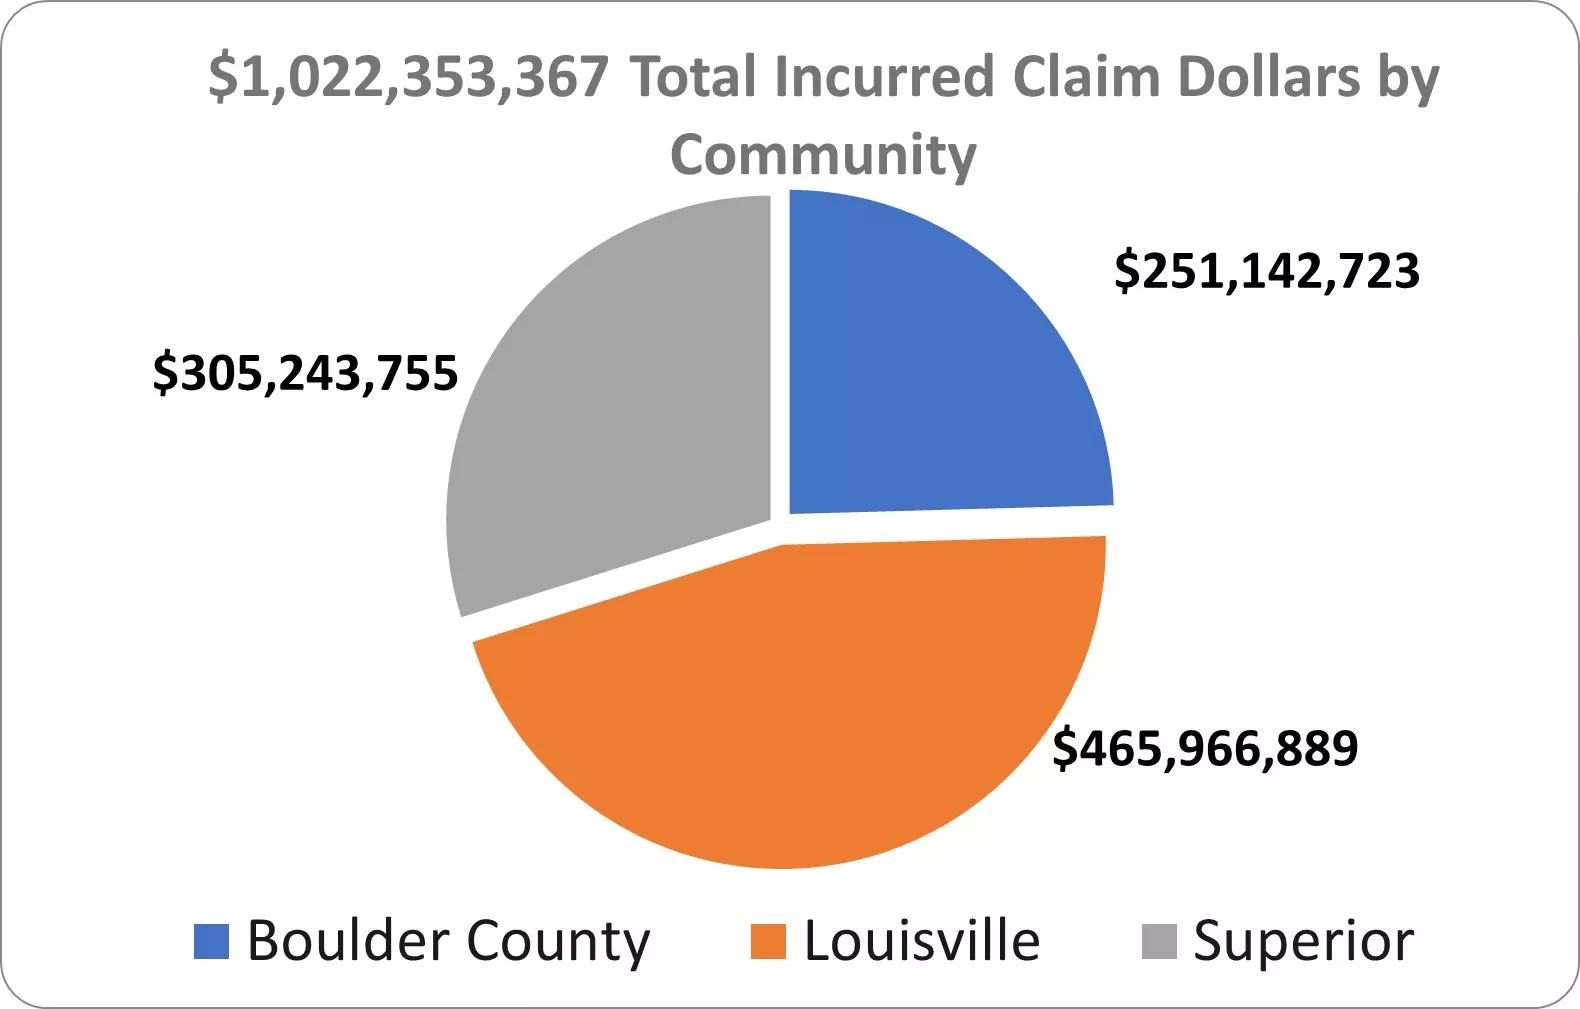 Total Incurred Insurance Claims Dollars so far for Marshall Fire: $1,022,353,367 ($465,966,889 in Louisville, $305,243,755 in Superior, and $251,142,723 in unincorporated Boulder County)